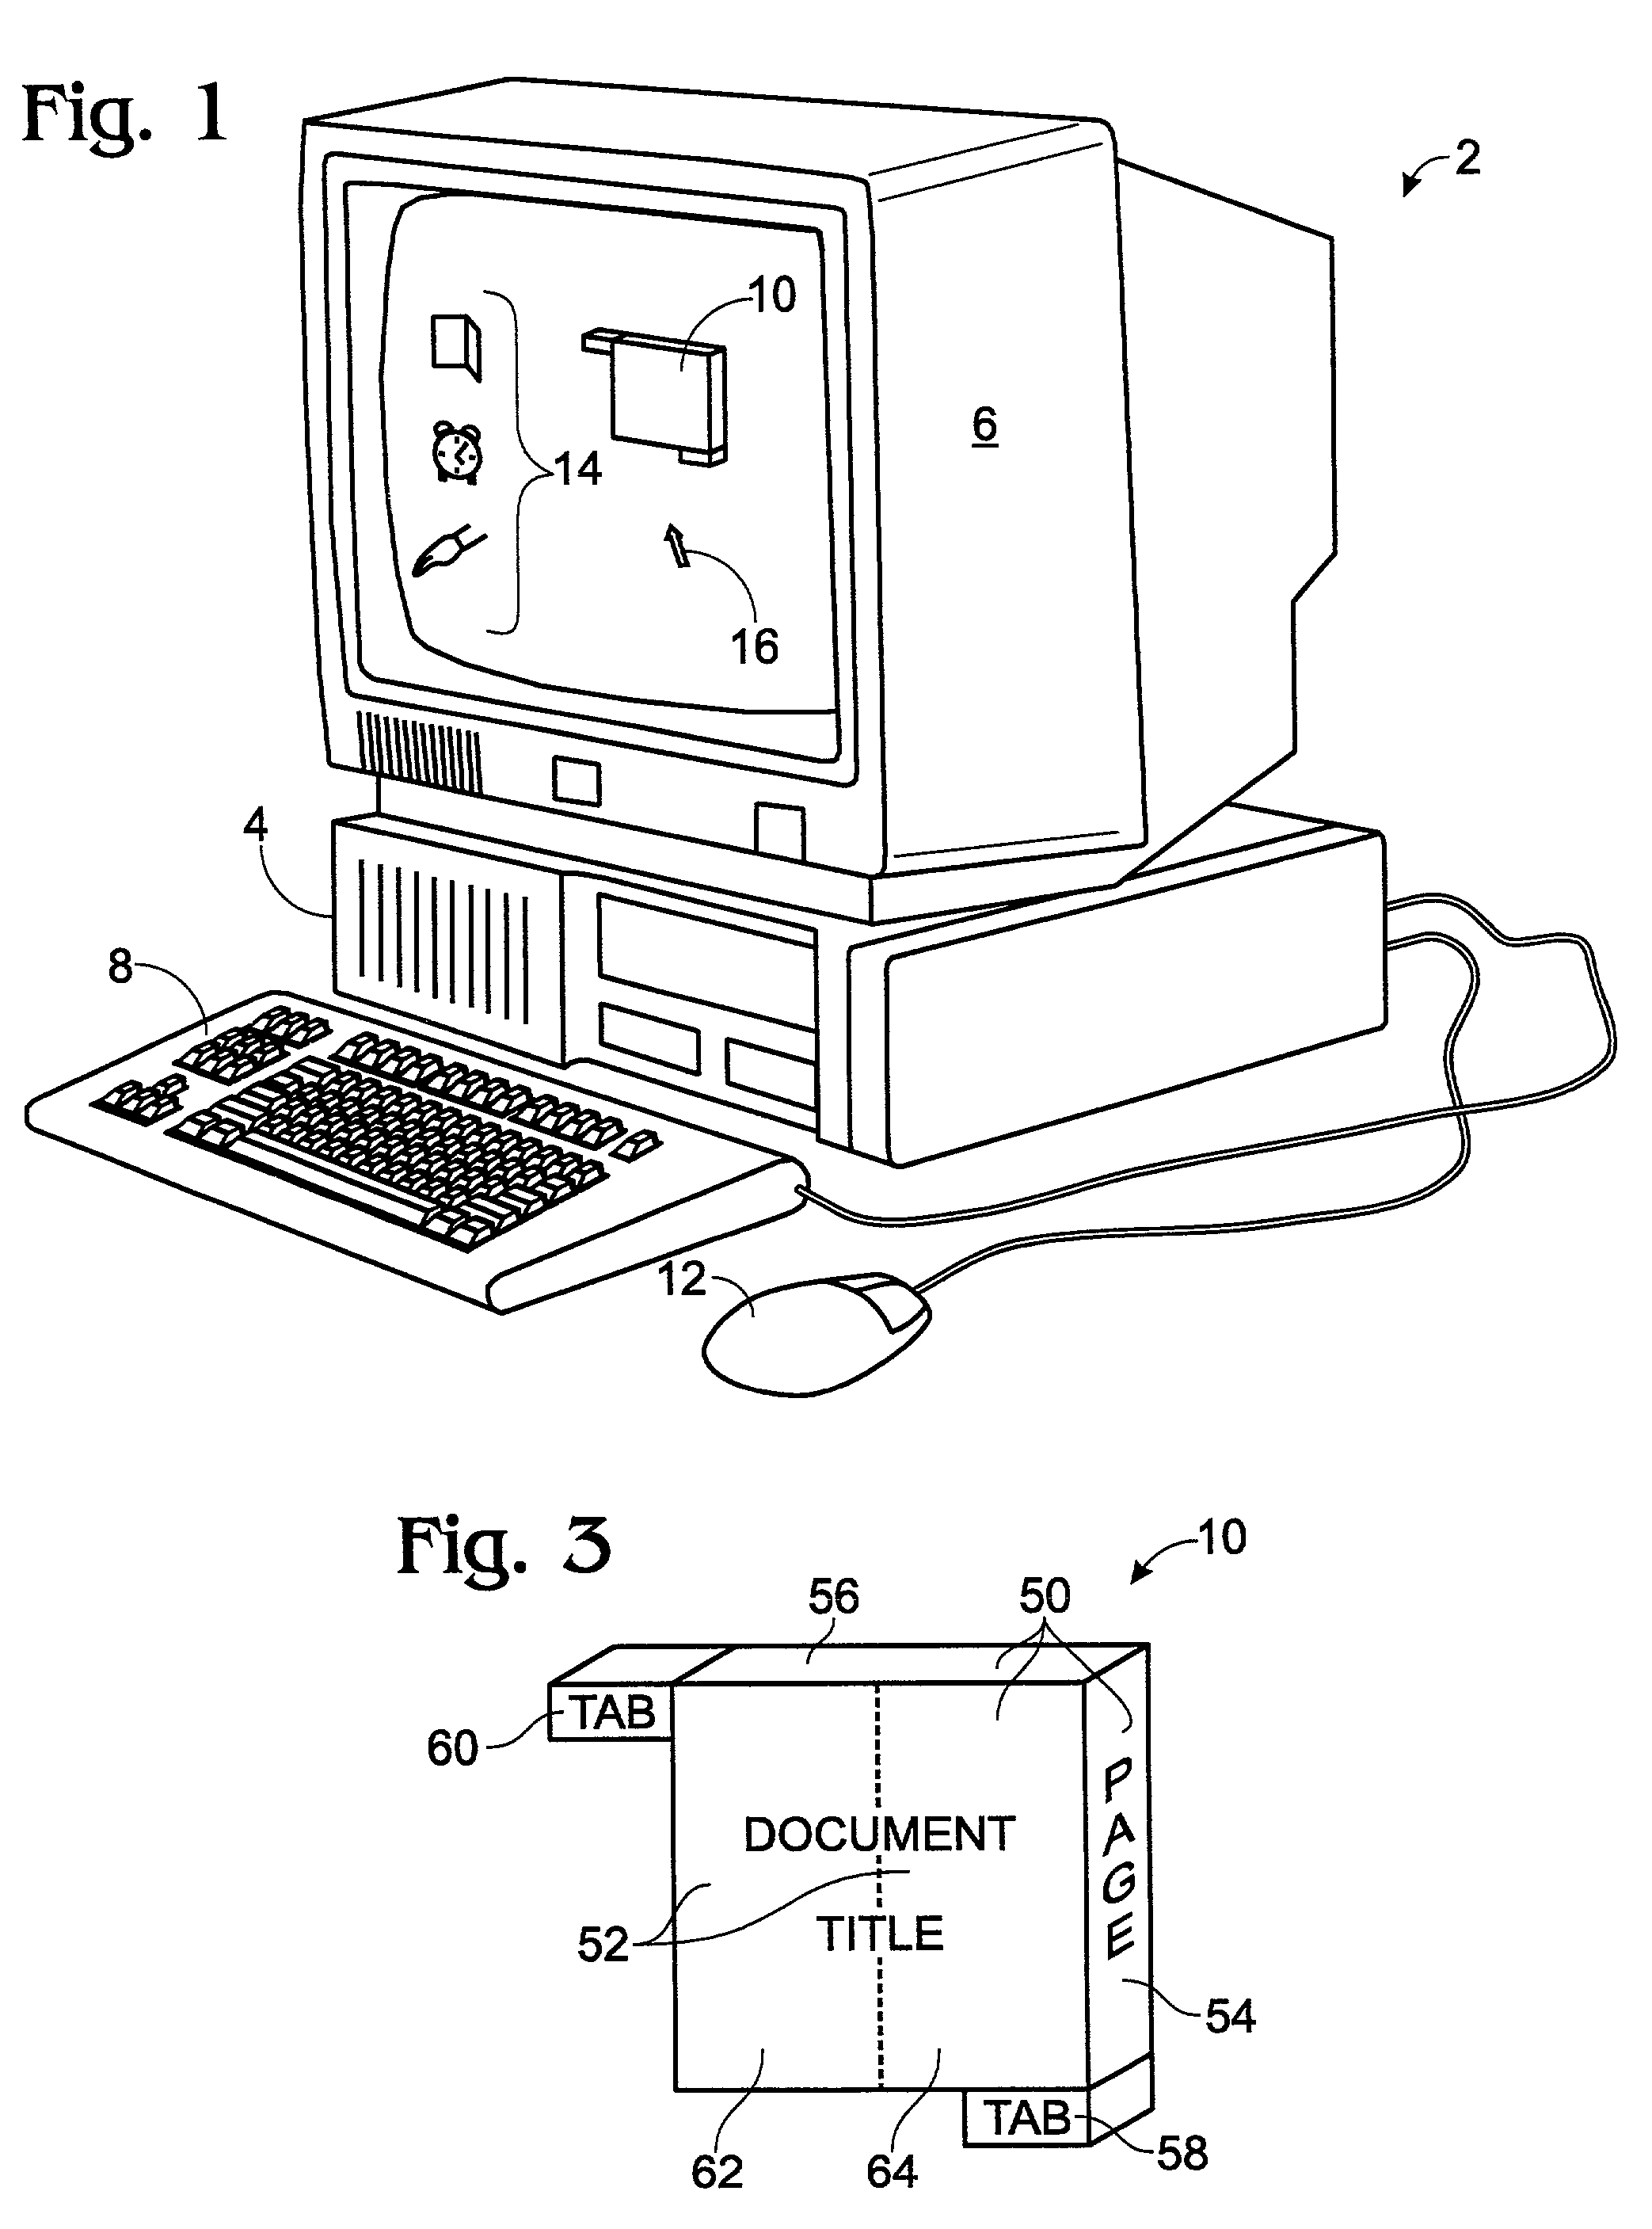 Systems and methods for manipulating electronic information using a three-dimensional iconic representation